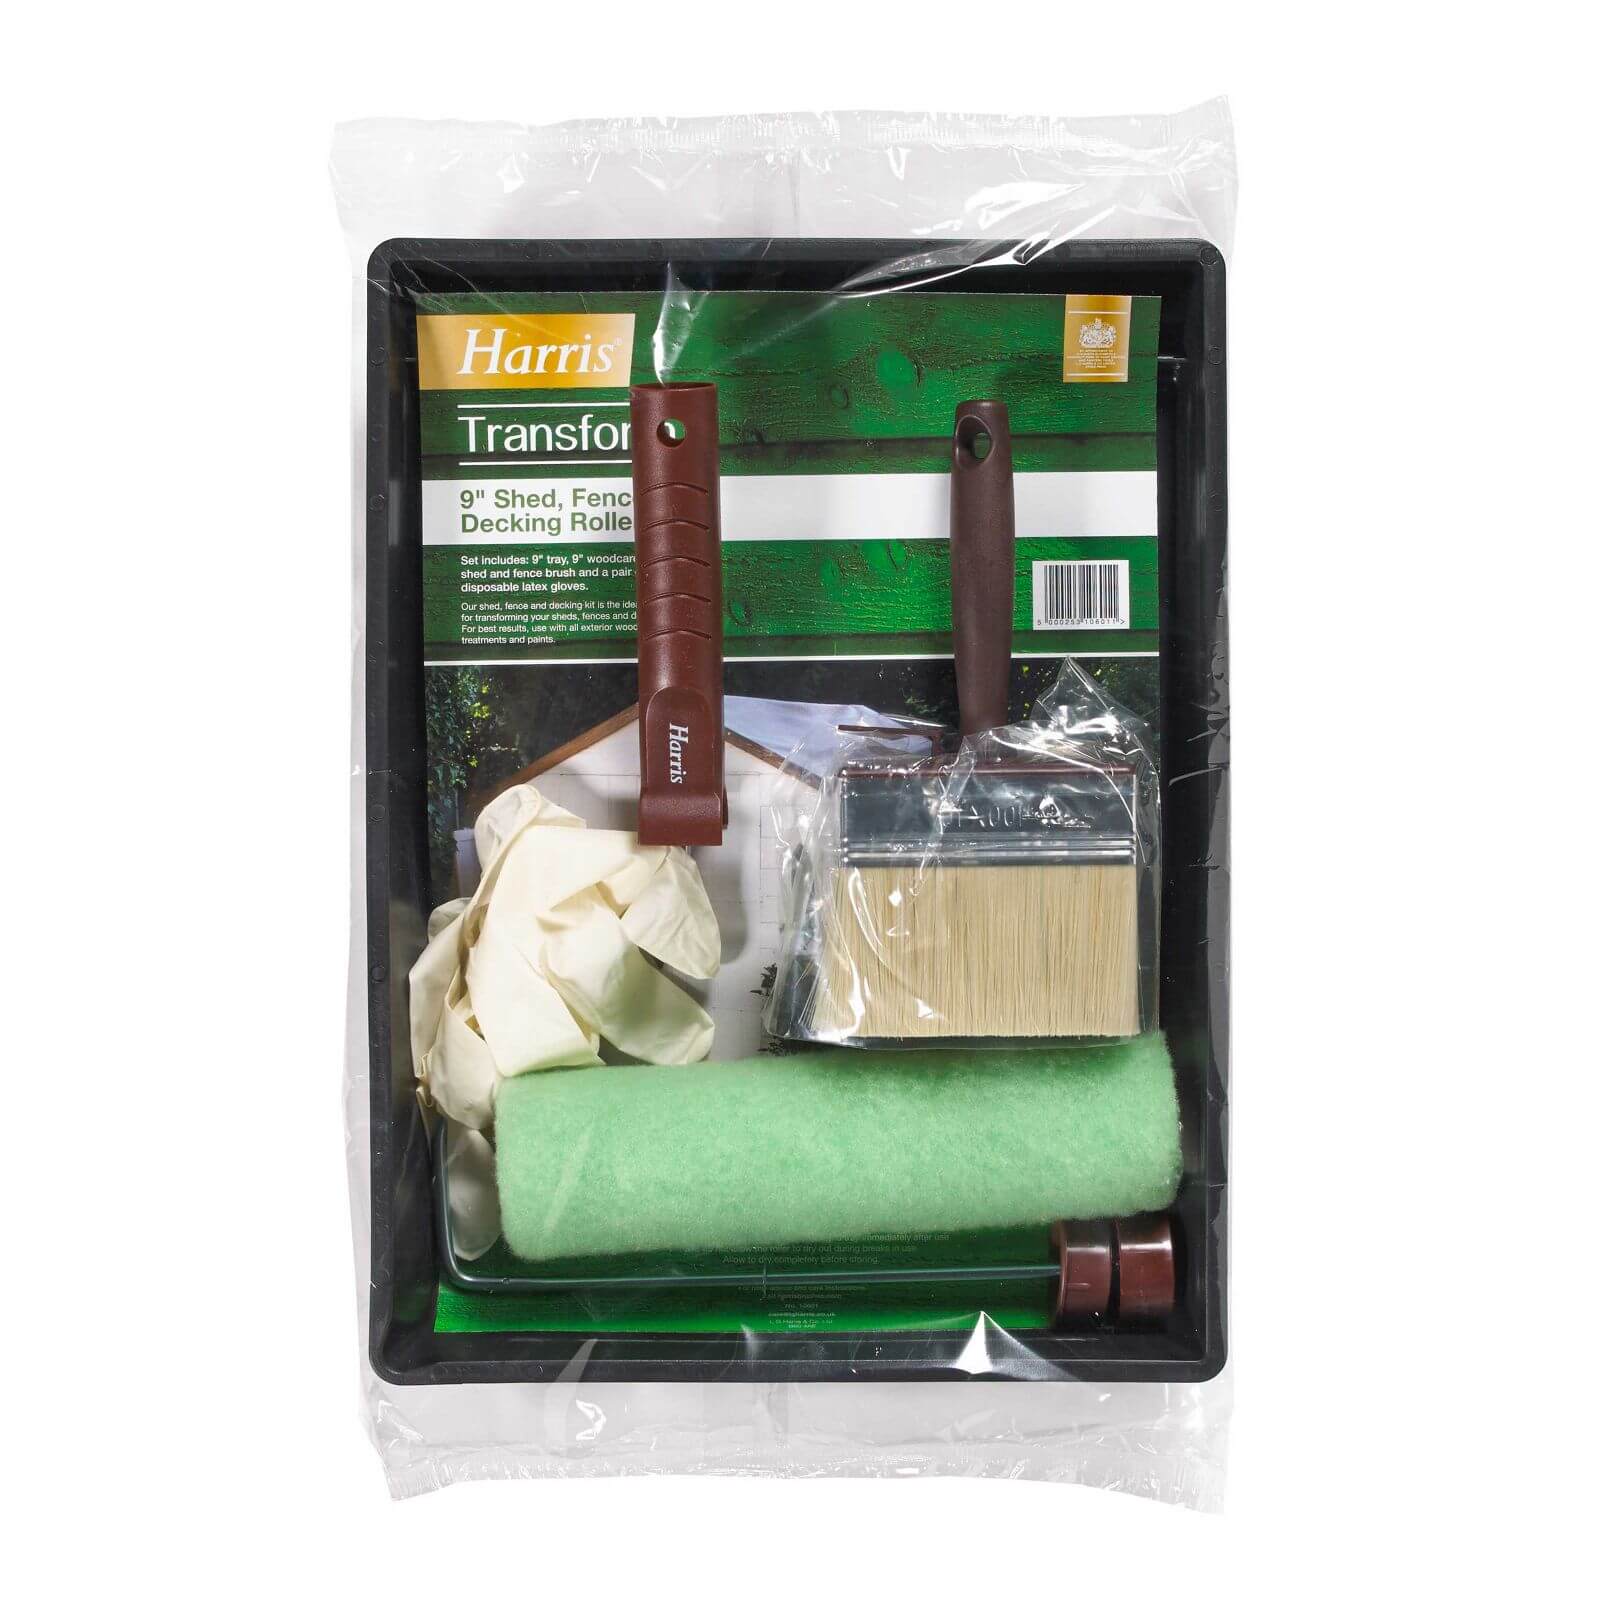 Harris Transform 9in Shed & Fence Roller Kit